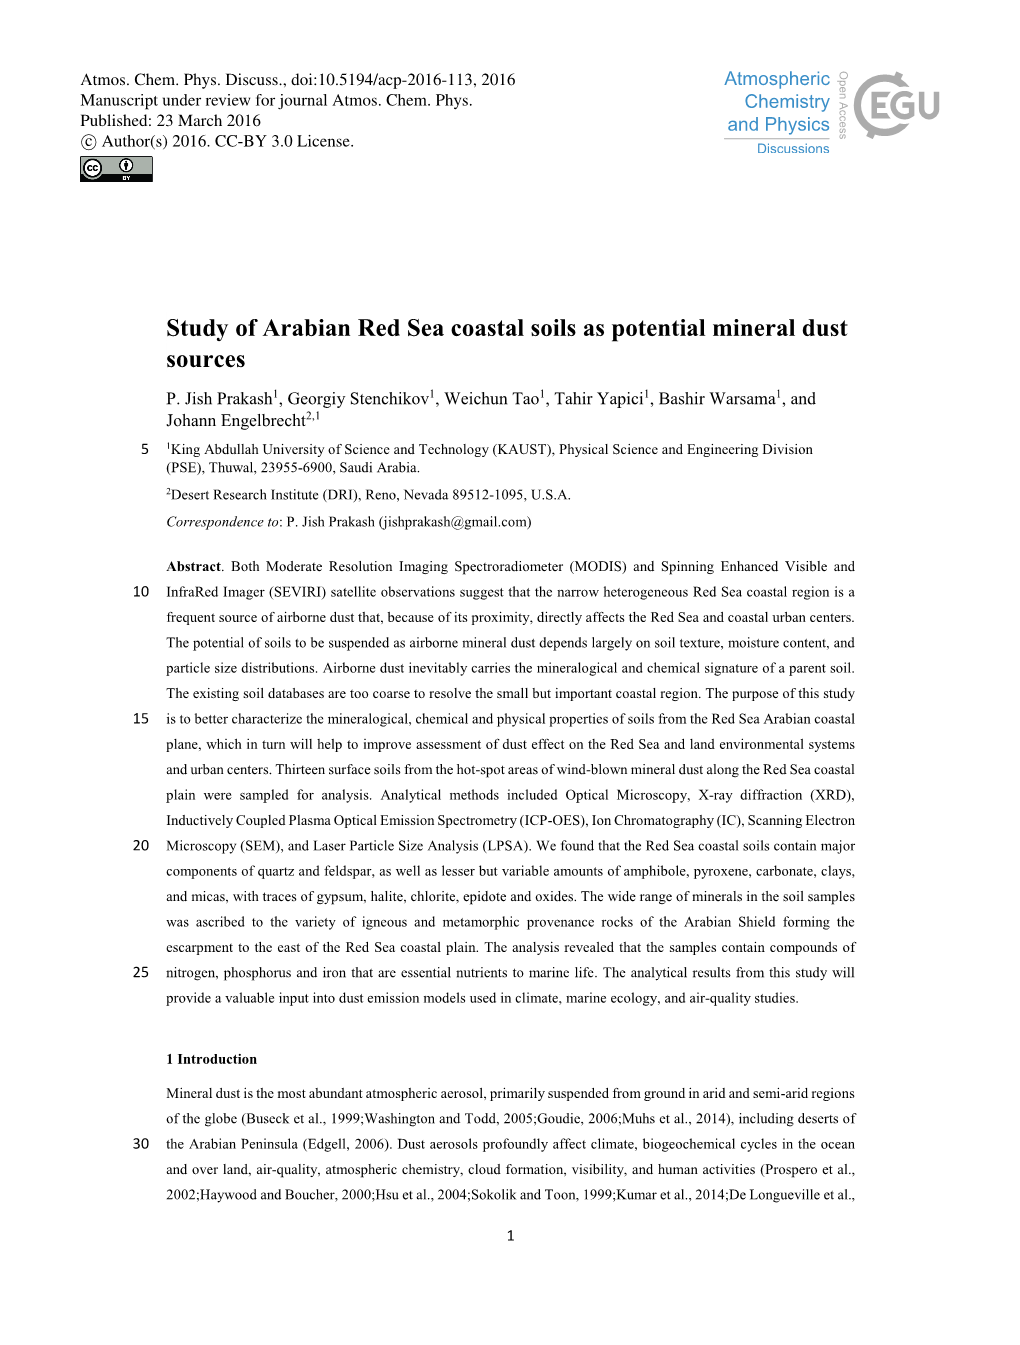 Study of Arabian Red Sea Coastal Soils As Potential Mineral Dust Sources P